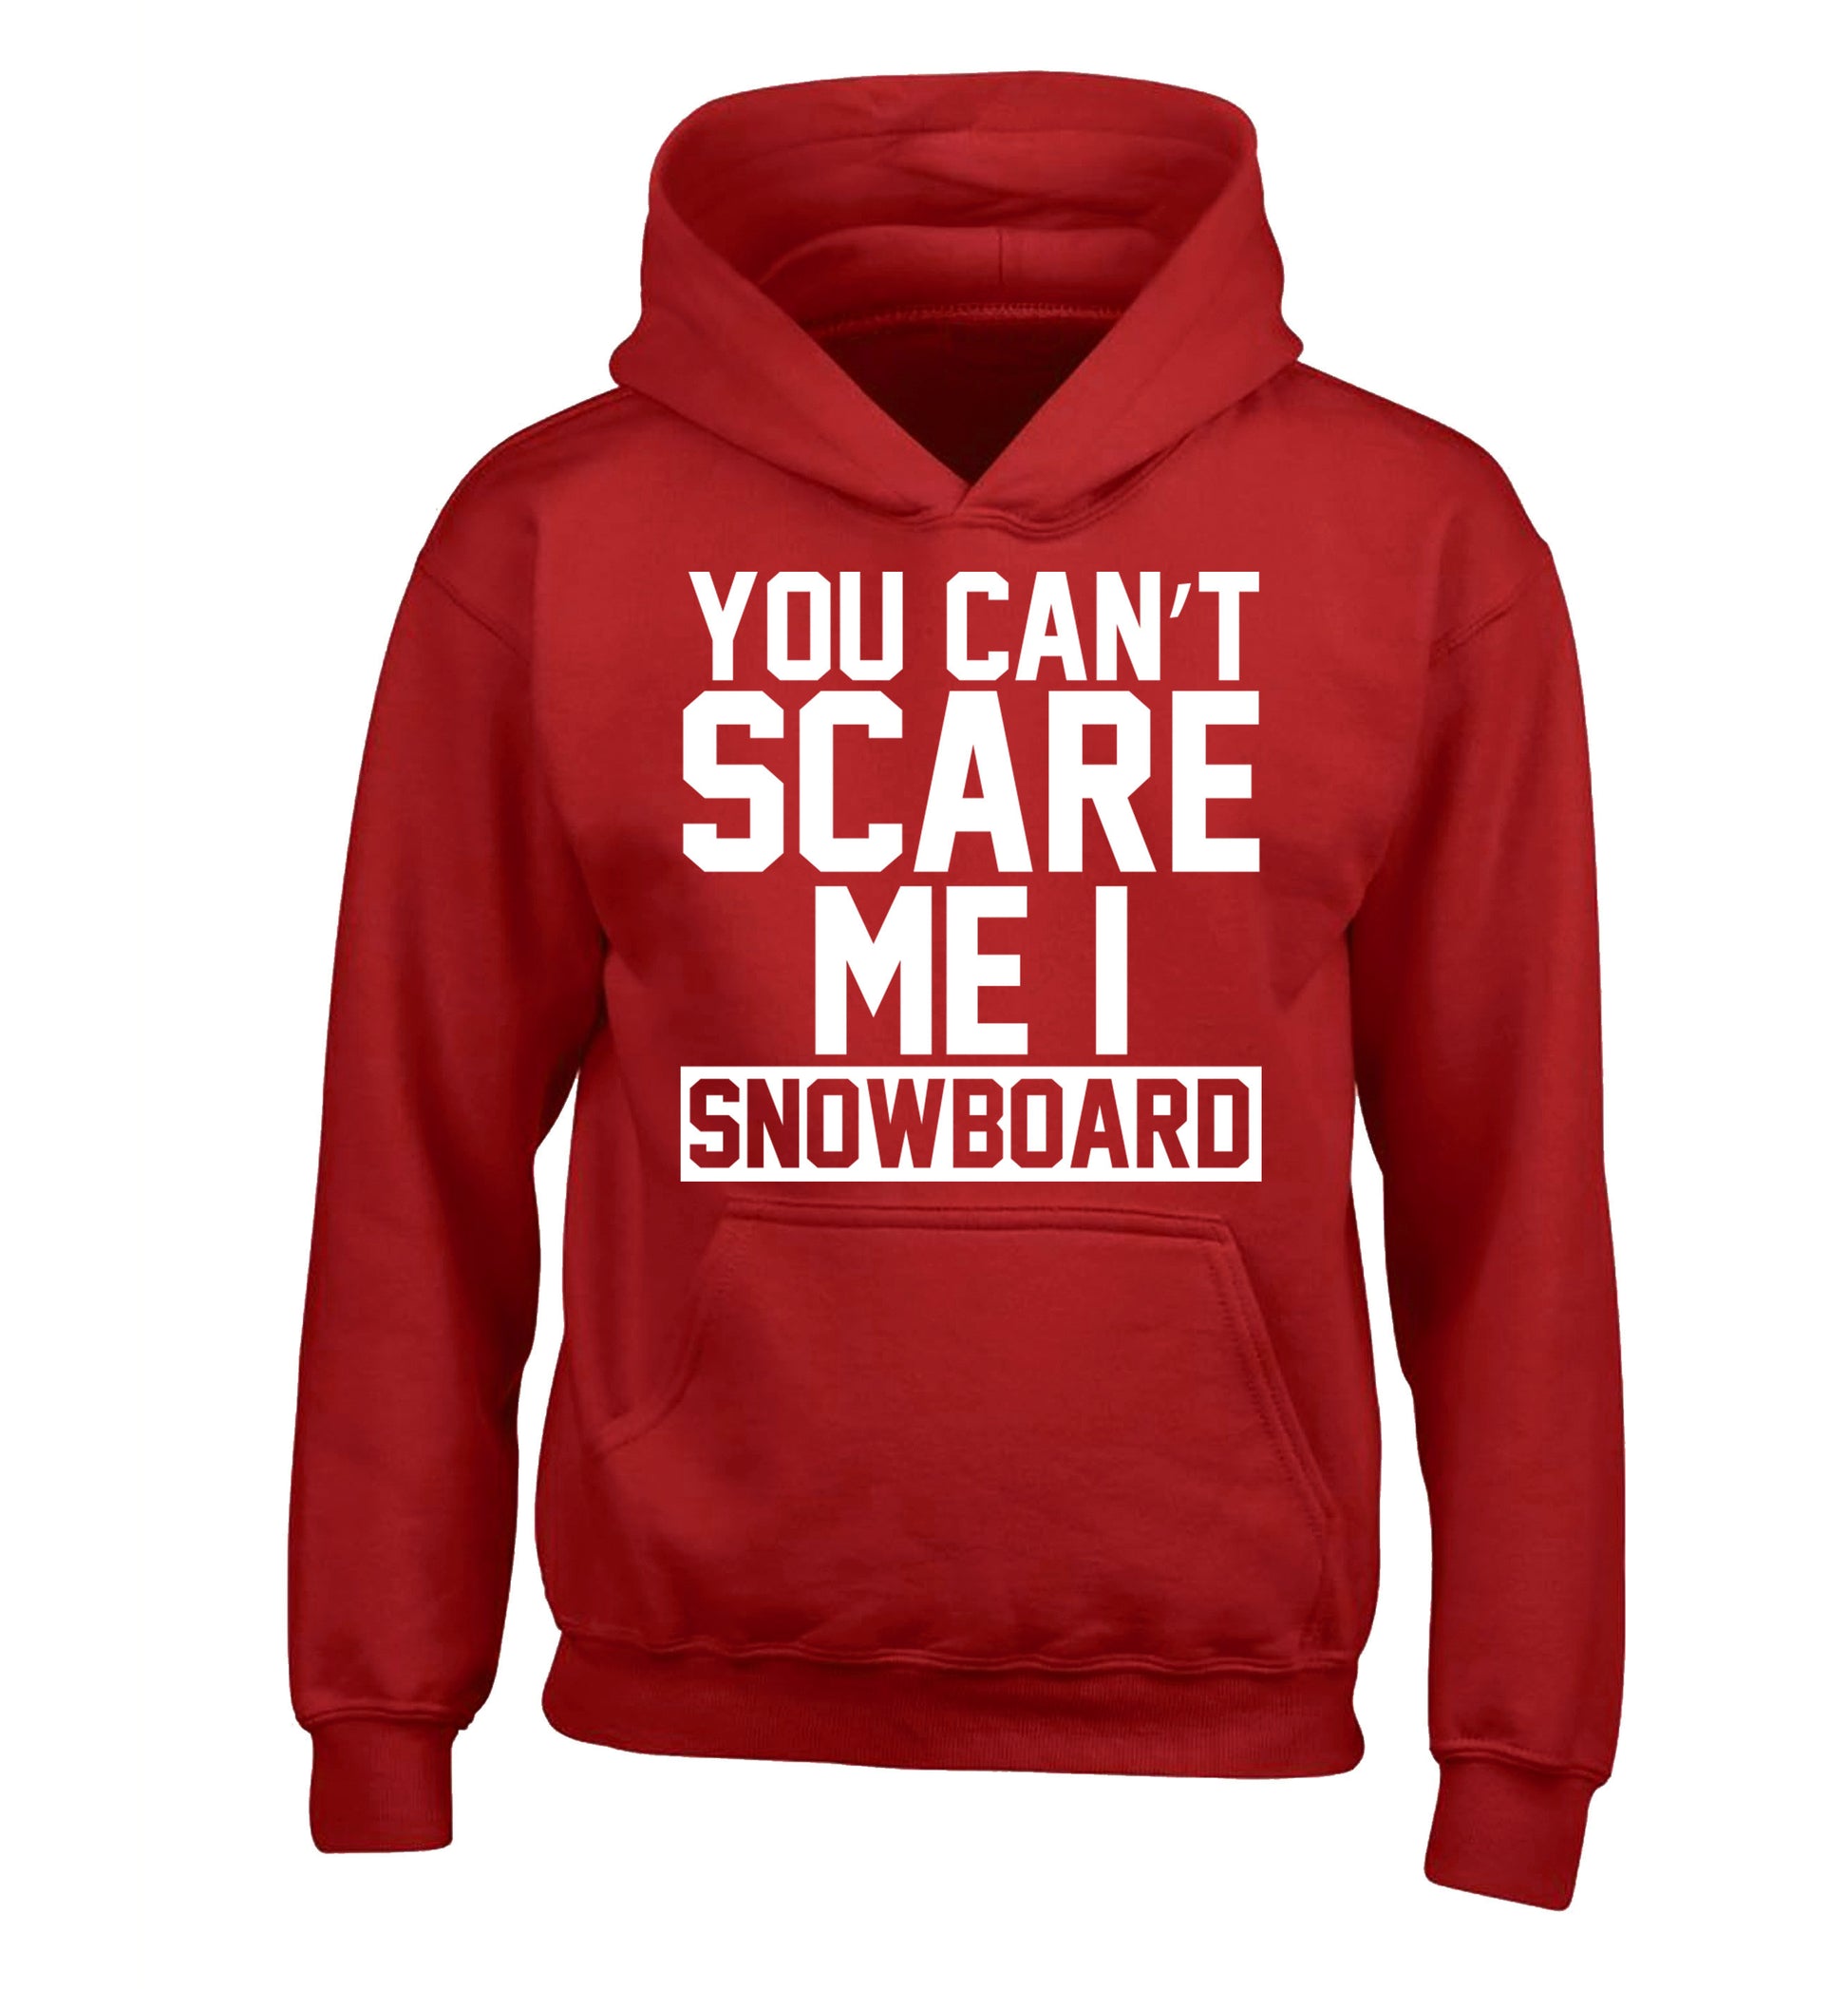 You can't scare me I snowboard children's red hoodie 12-14 Years